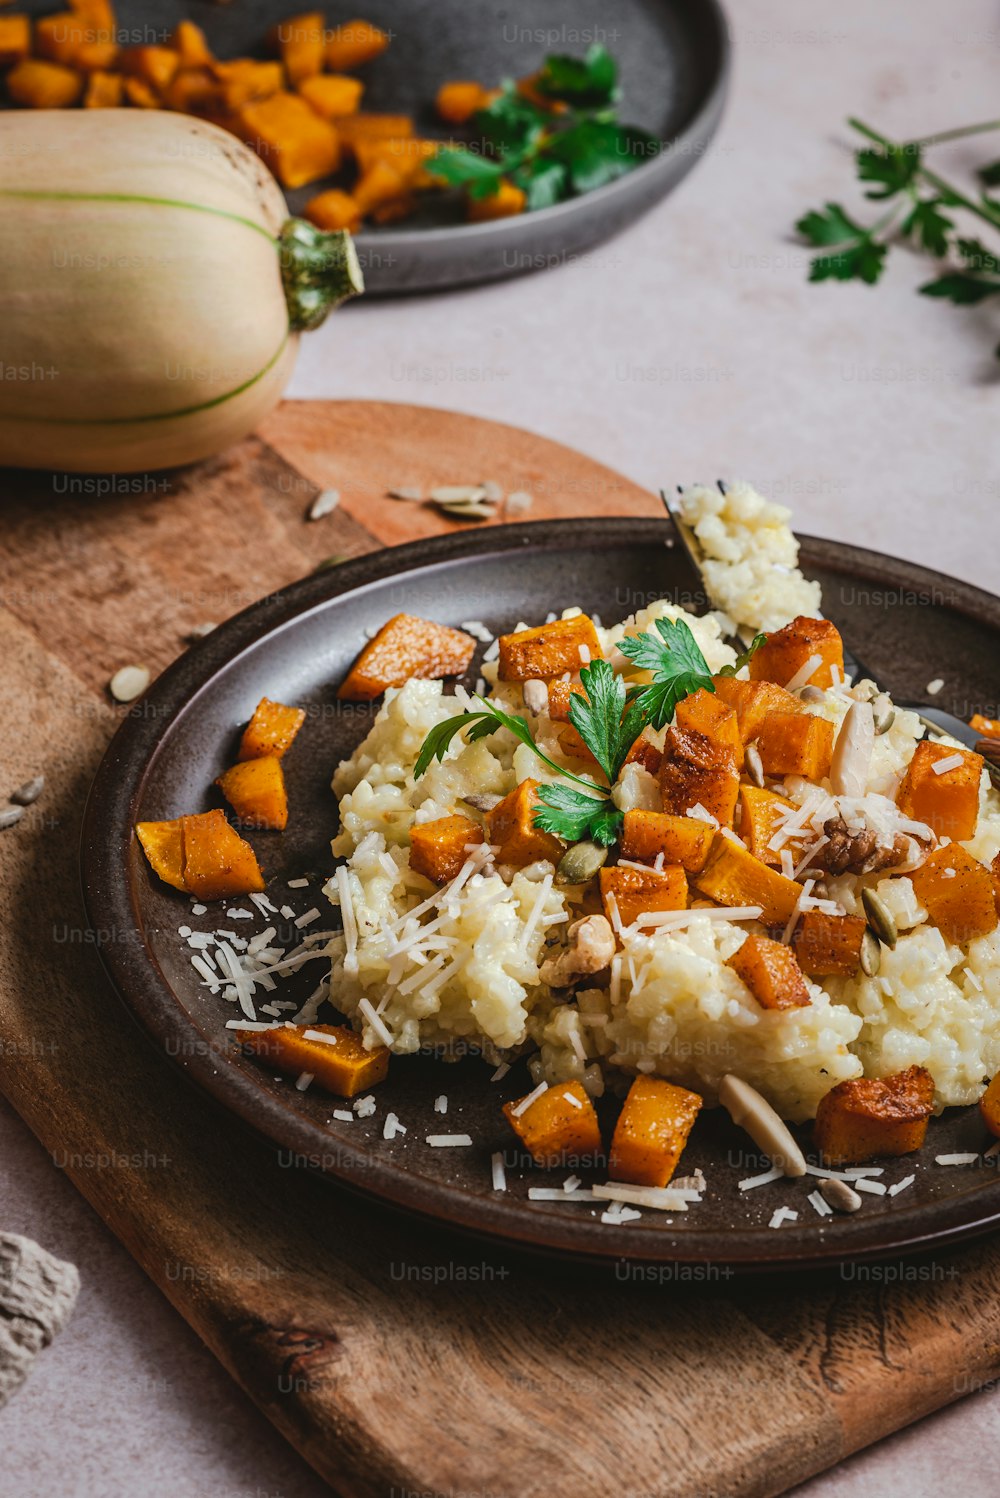 a plate of mashed potatoes and carrots on a cutting board